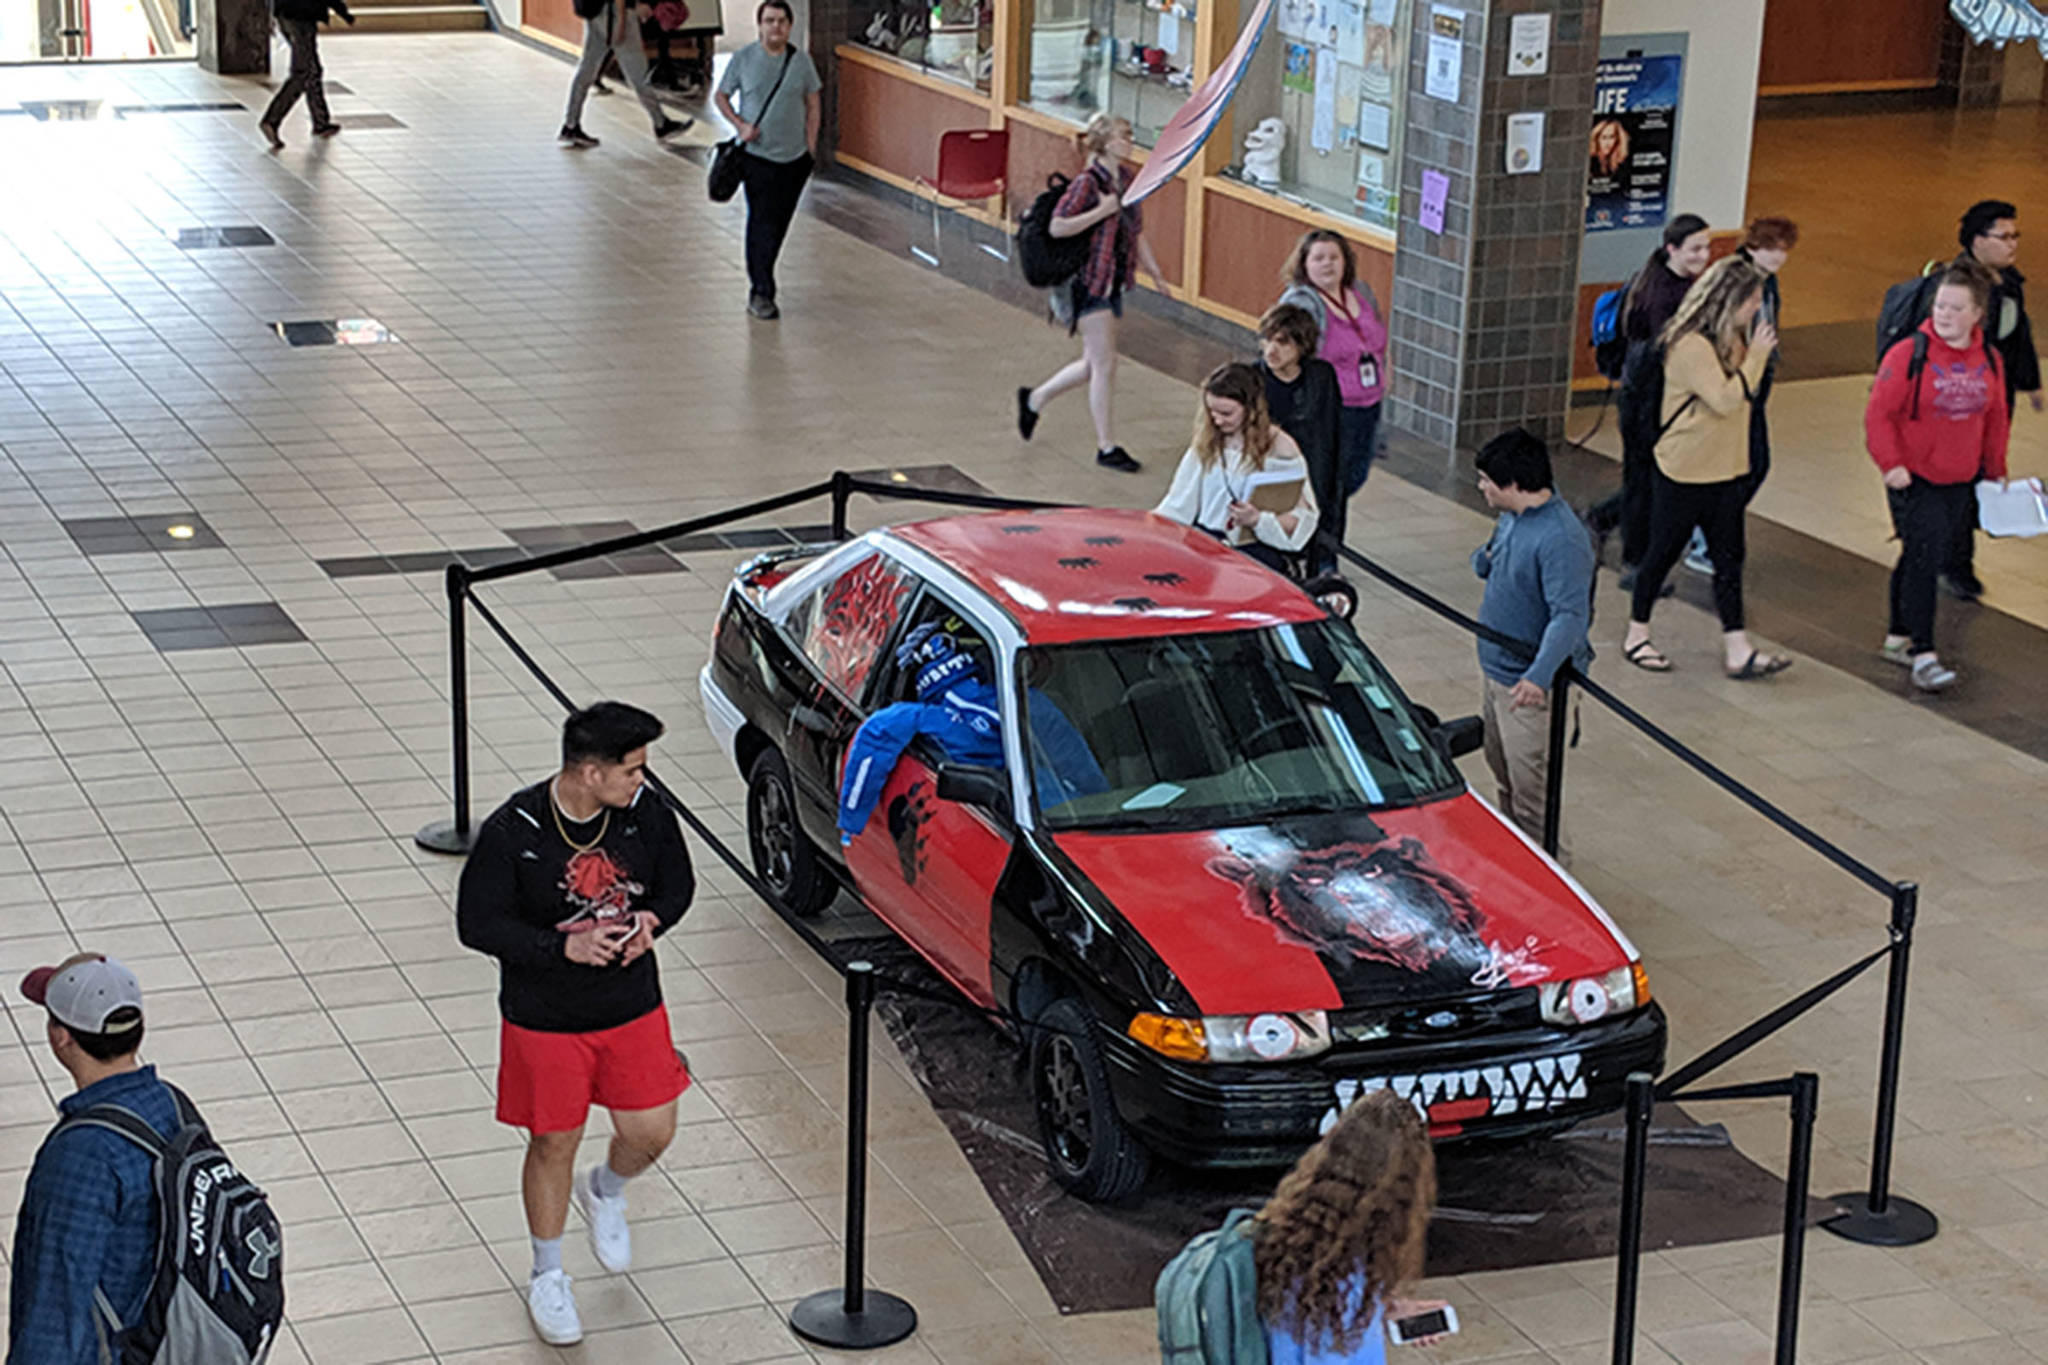 A prank with class: Seniors put car in high school commons